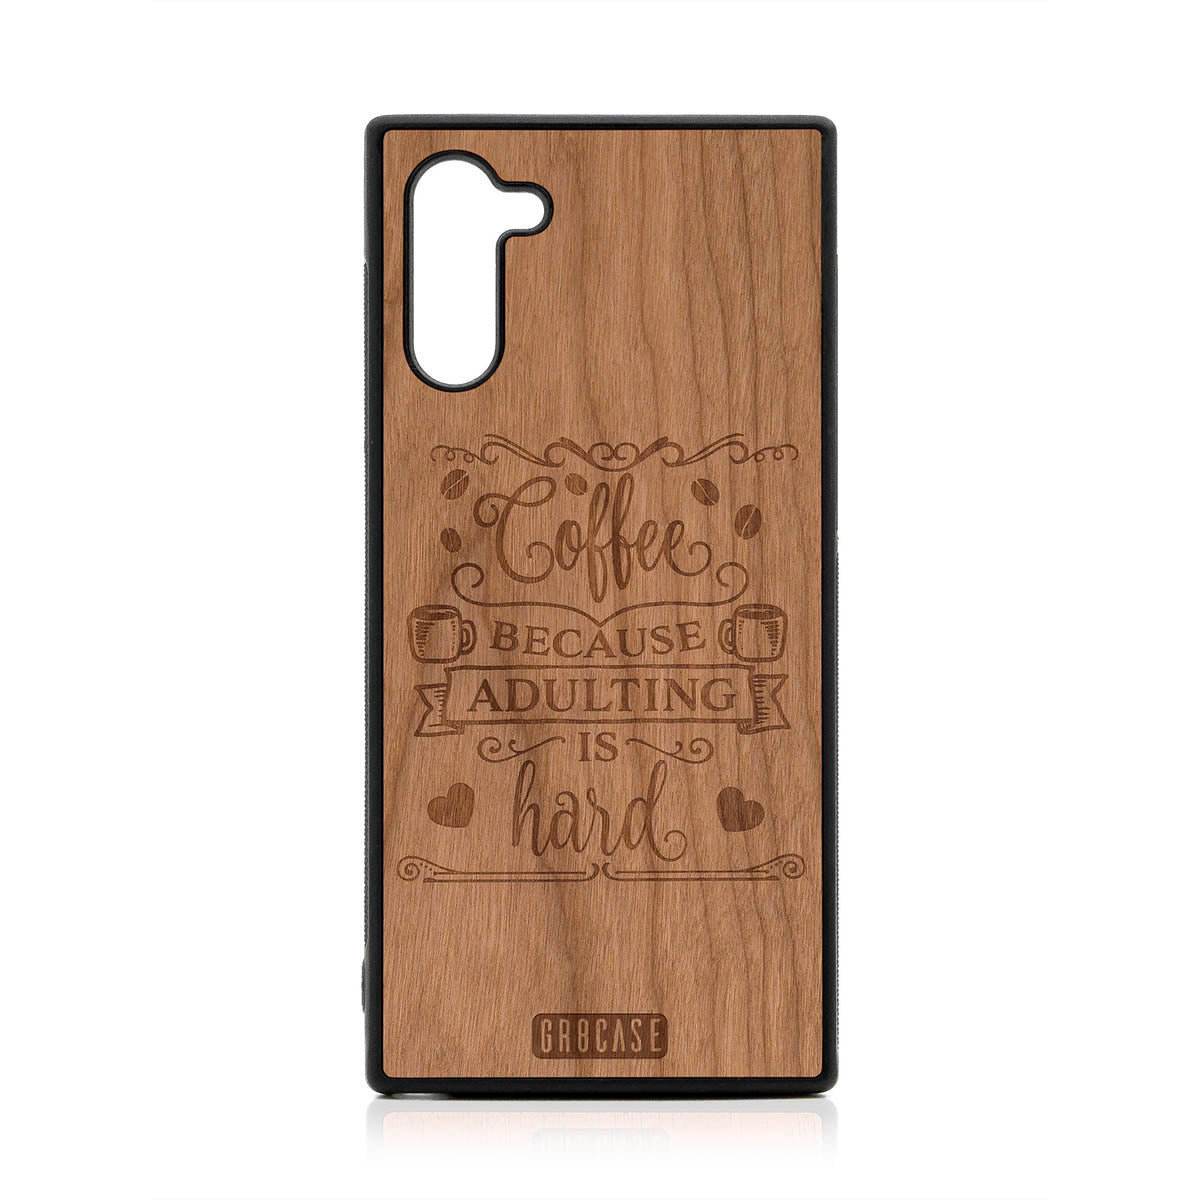 Coffee Because Adulting Is Hard Design Wood Case For Samsung Galaxy Note 10